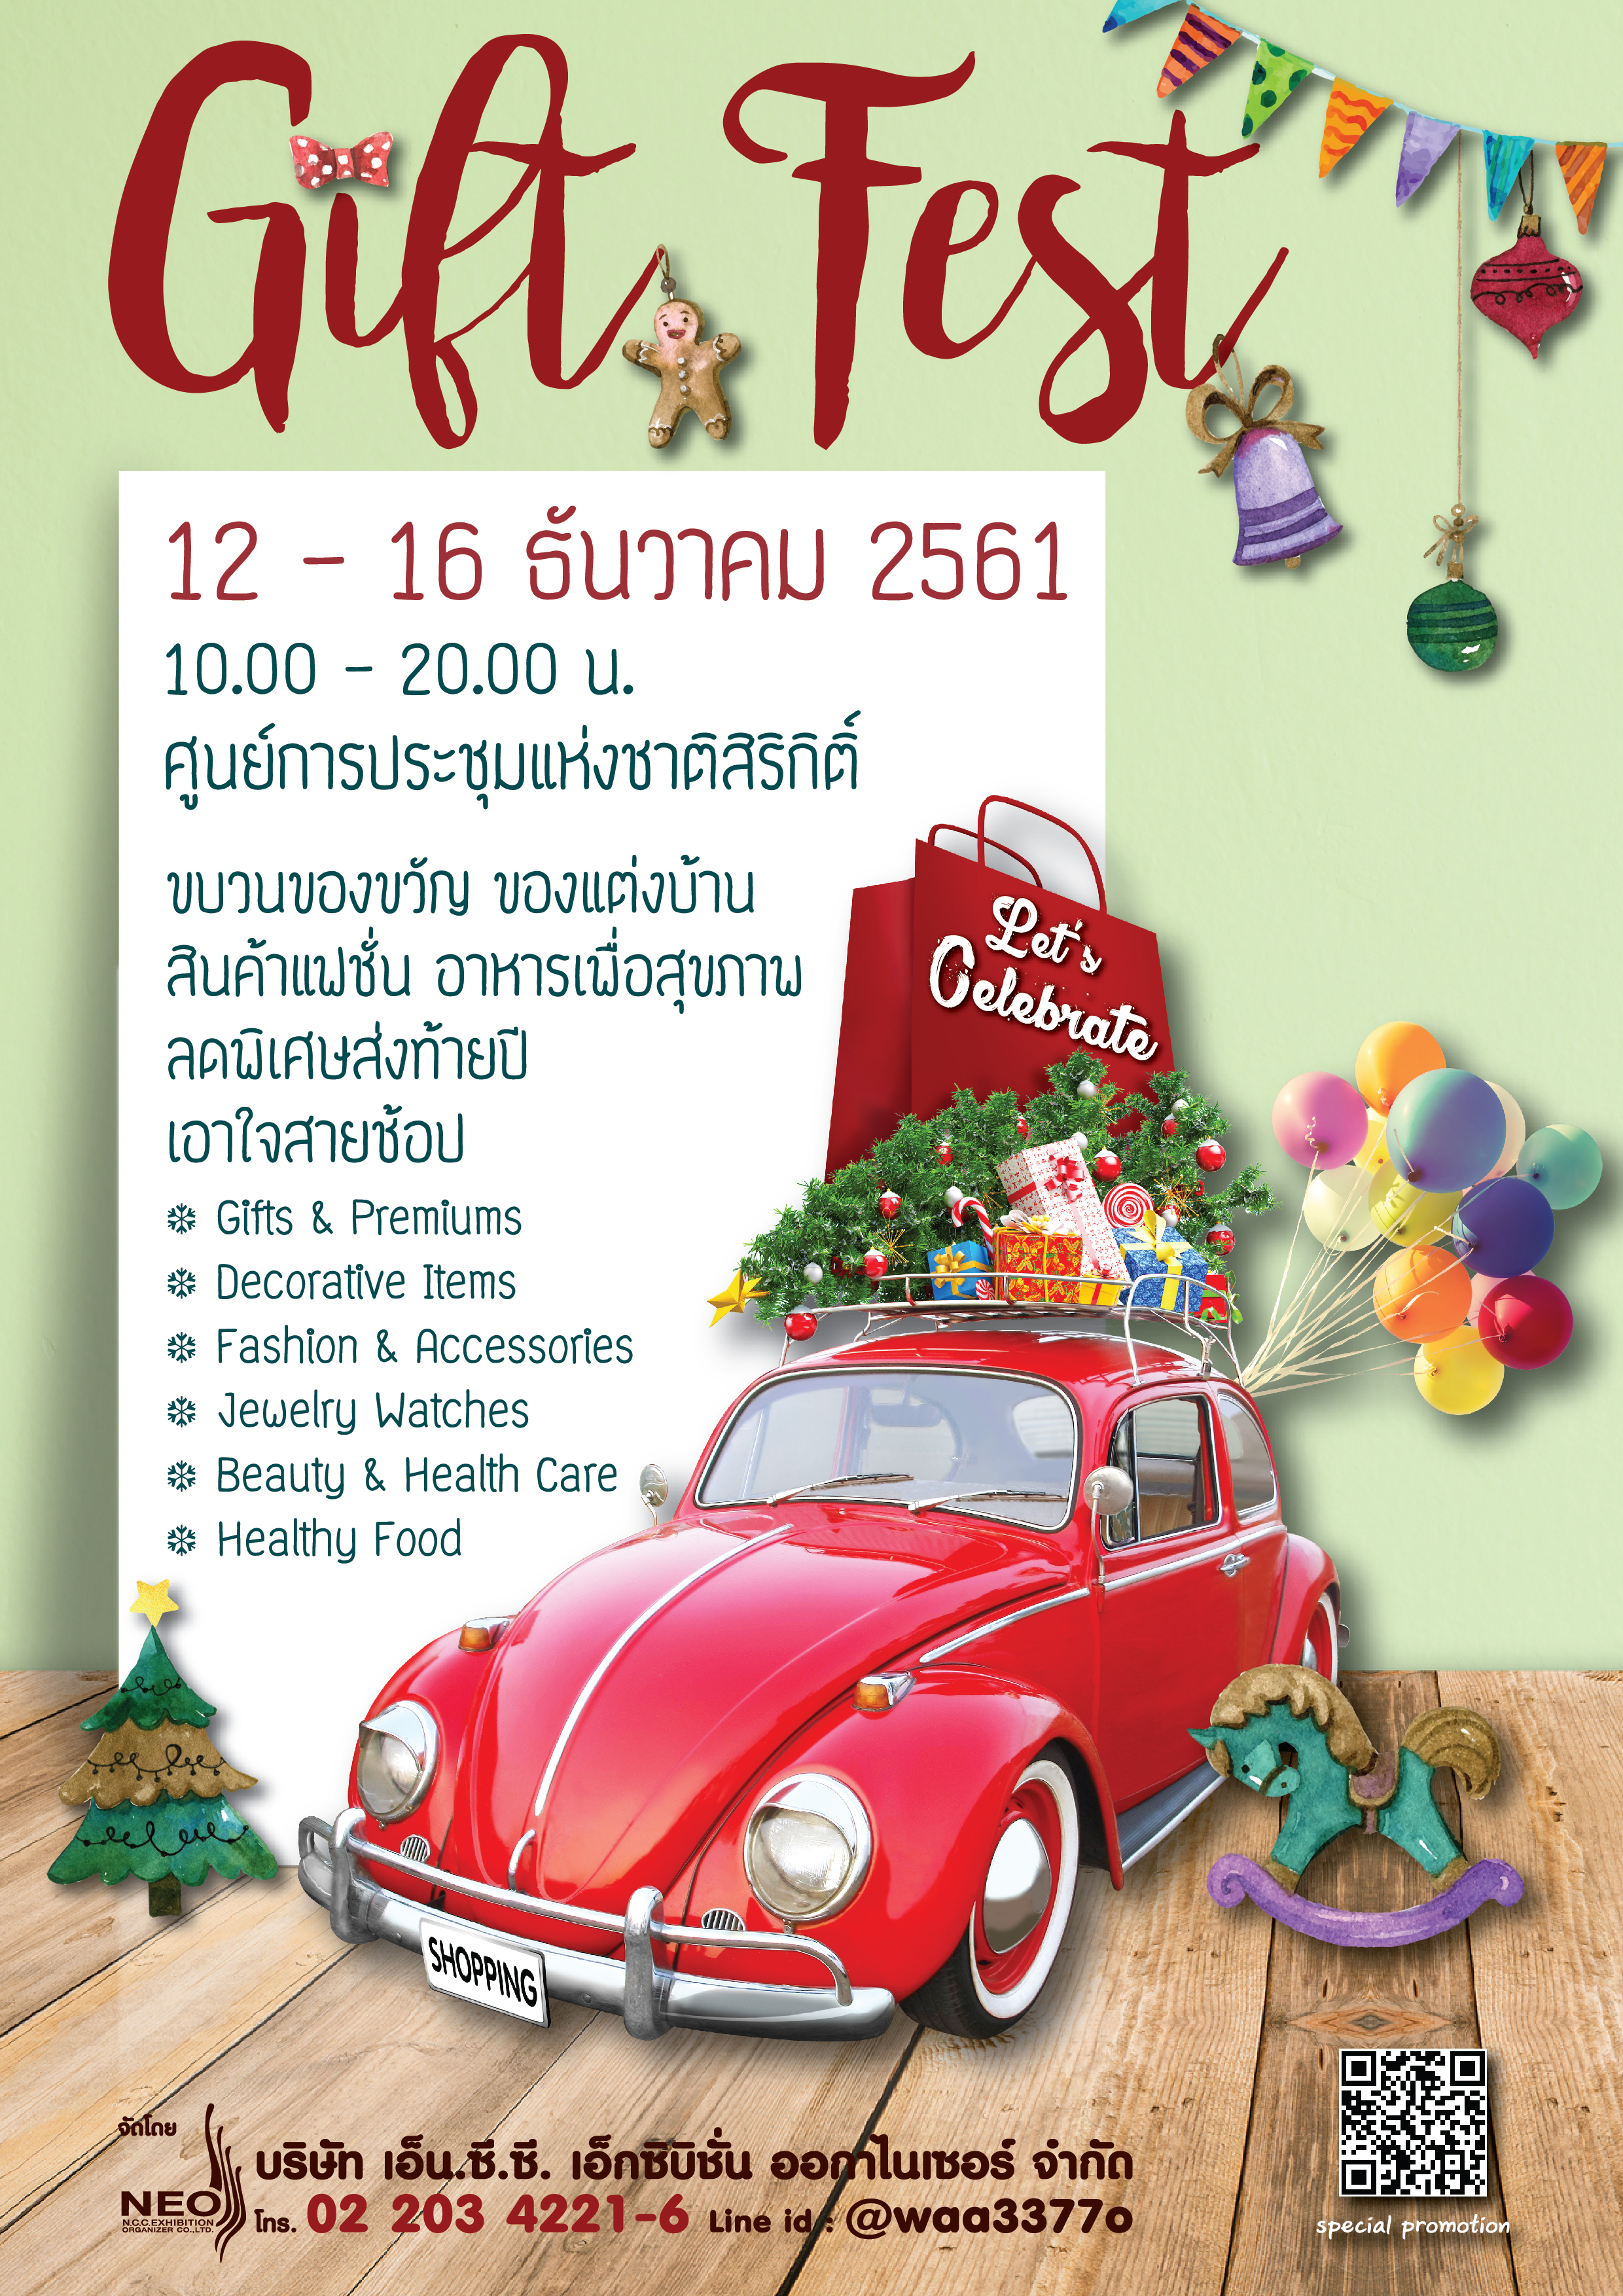 Gift Fest 2018 by Thailand Bestbuys